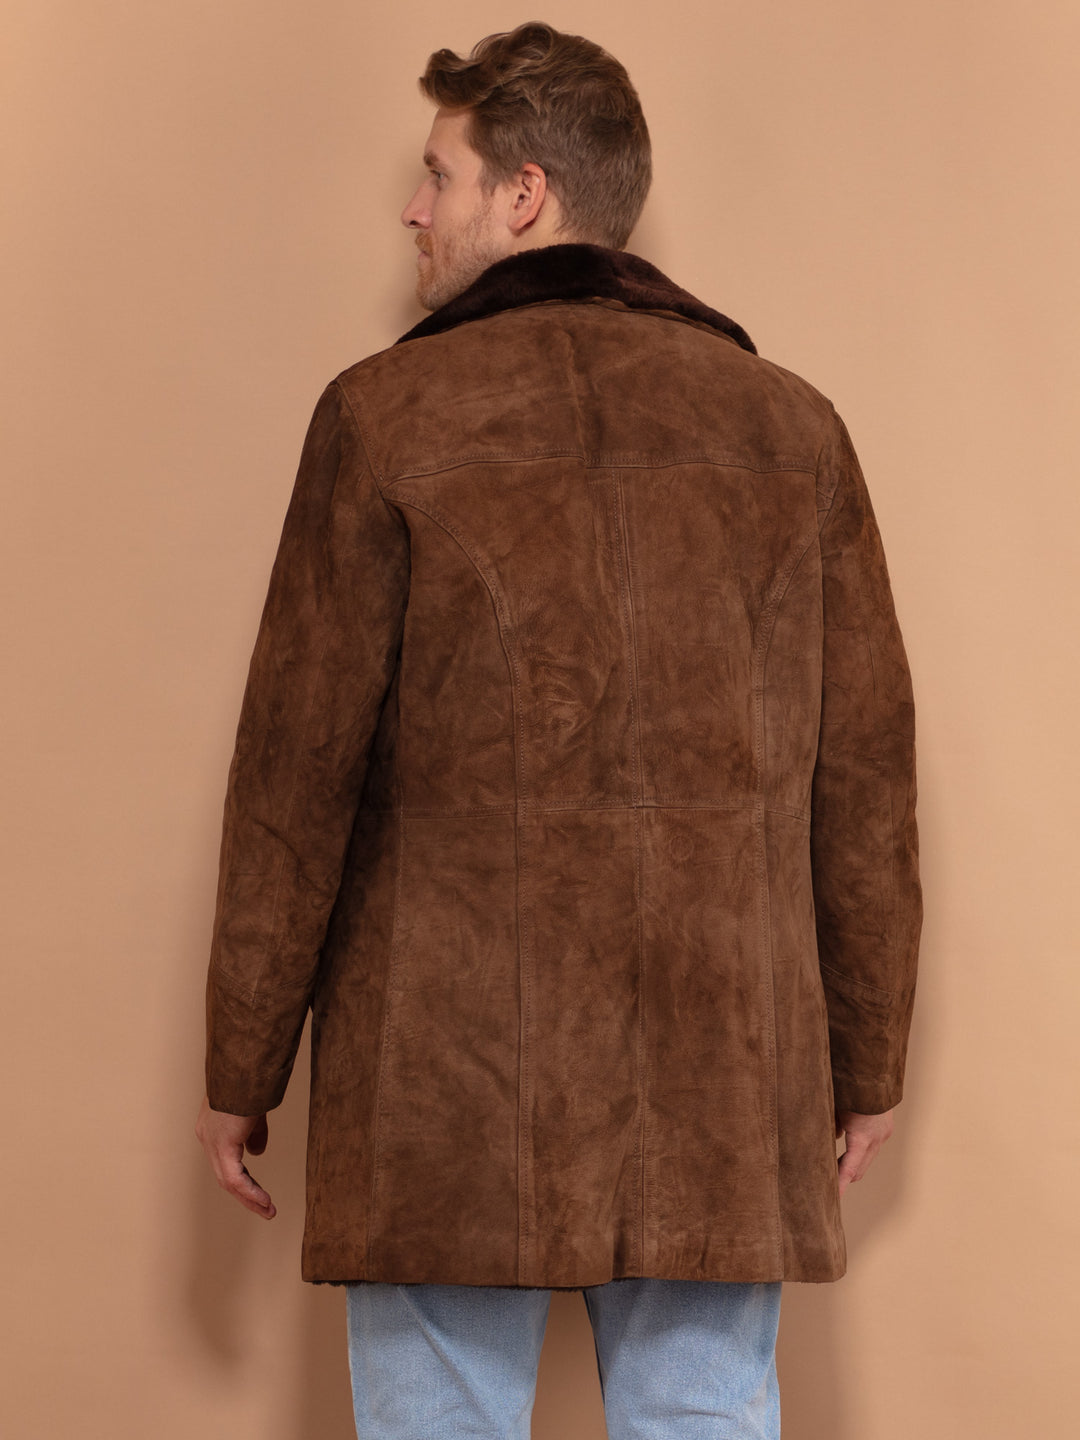 Double Breasted Suede Coat 90s, Size Large, Vintage Mens Brown Sherpa Coat, Faux Sheepskin Coat, Shearling Fur Collar Coat, Outerwear